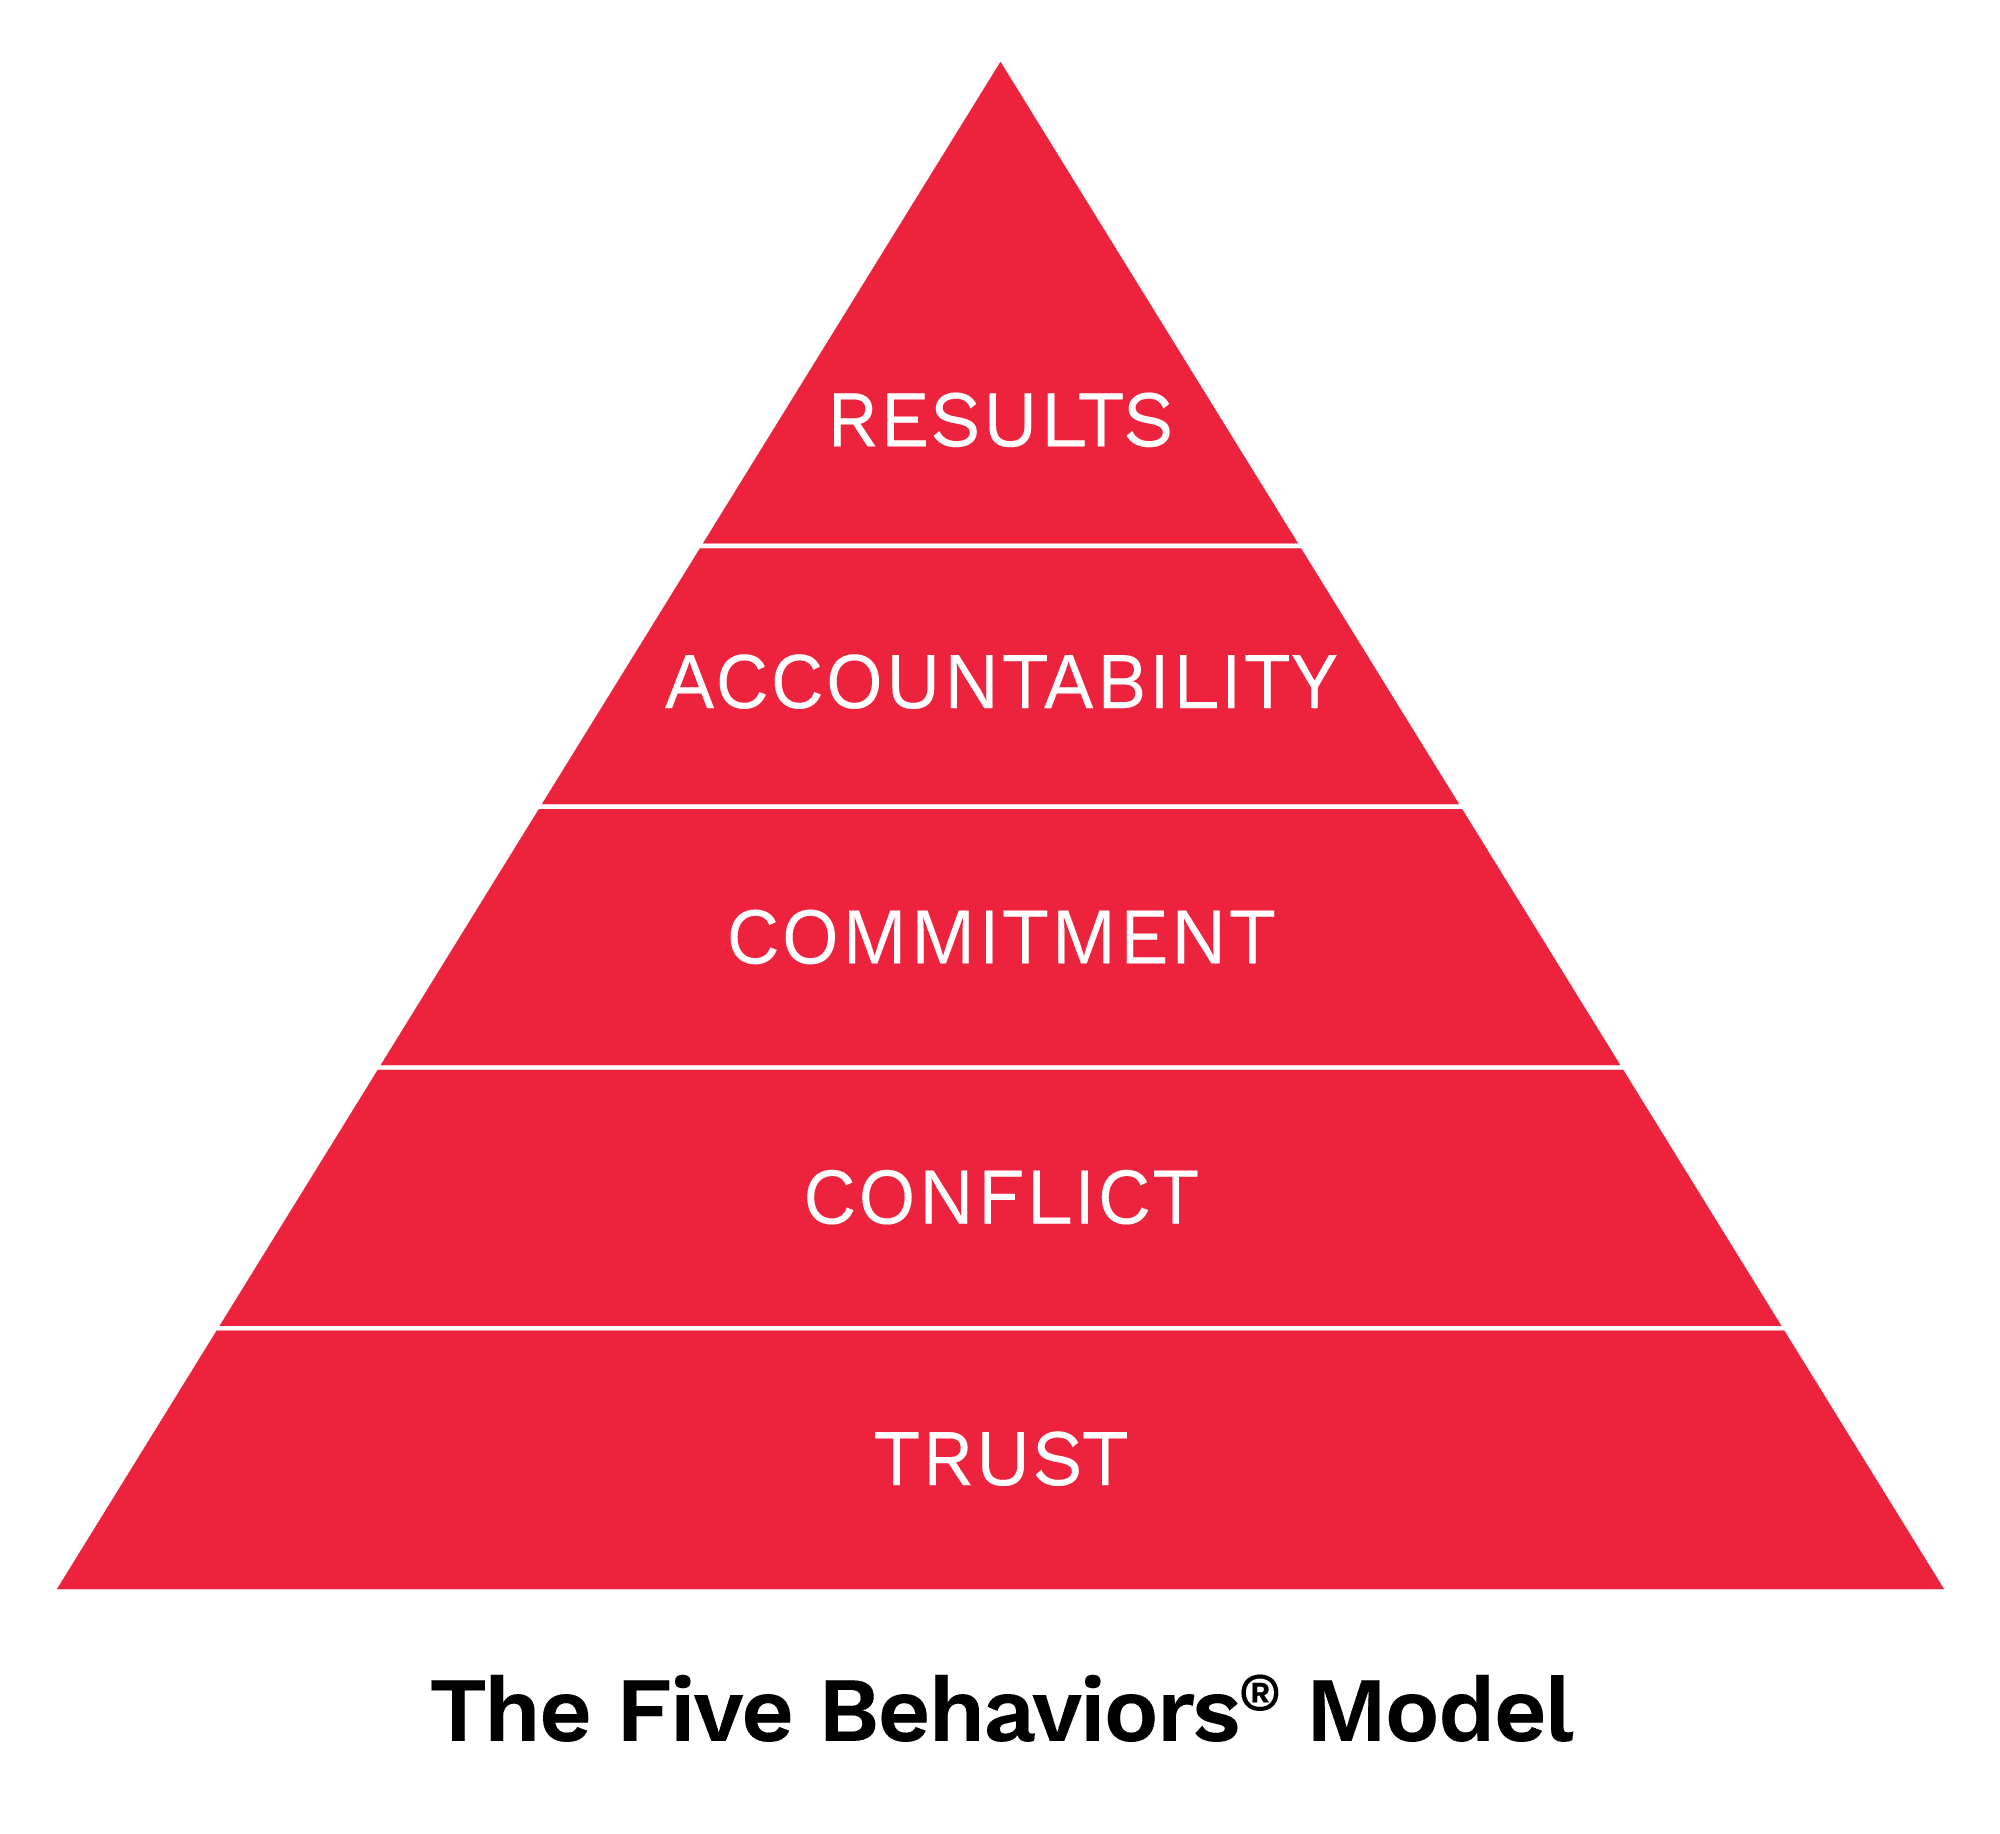 The Five Behaviors model: a pyramid show, from bottom, Trust, Conflict, Commitment, Accountability, Results